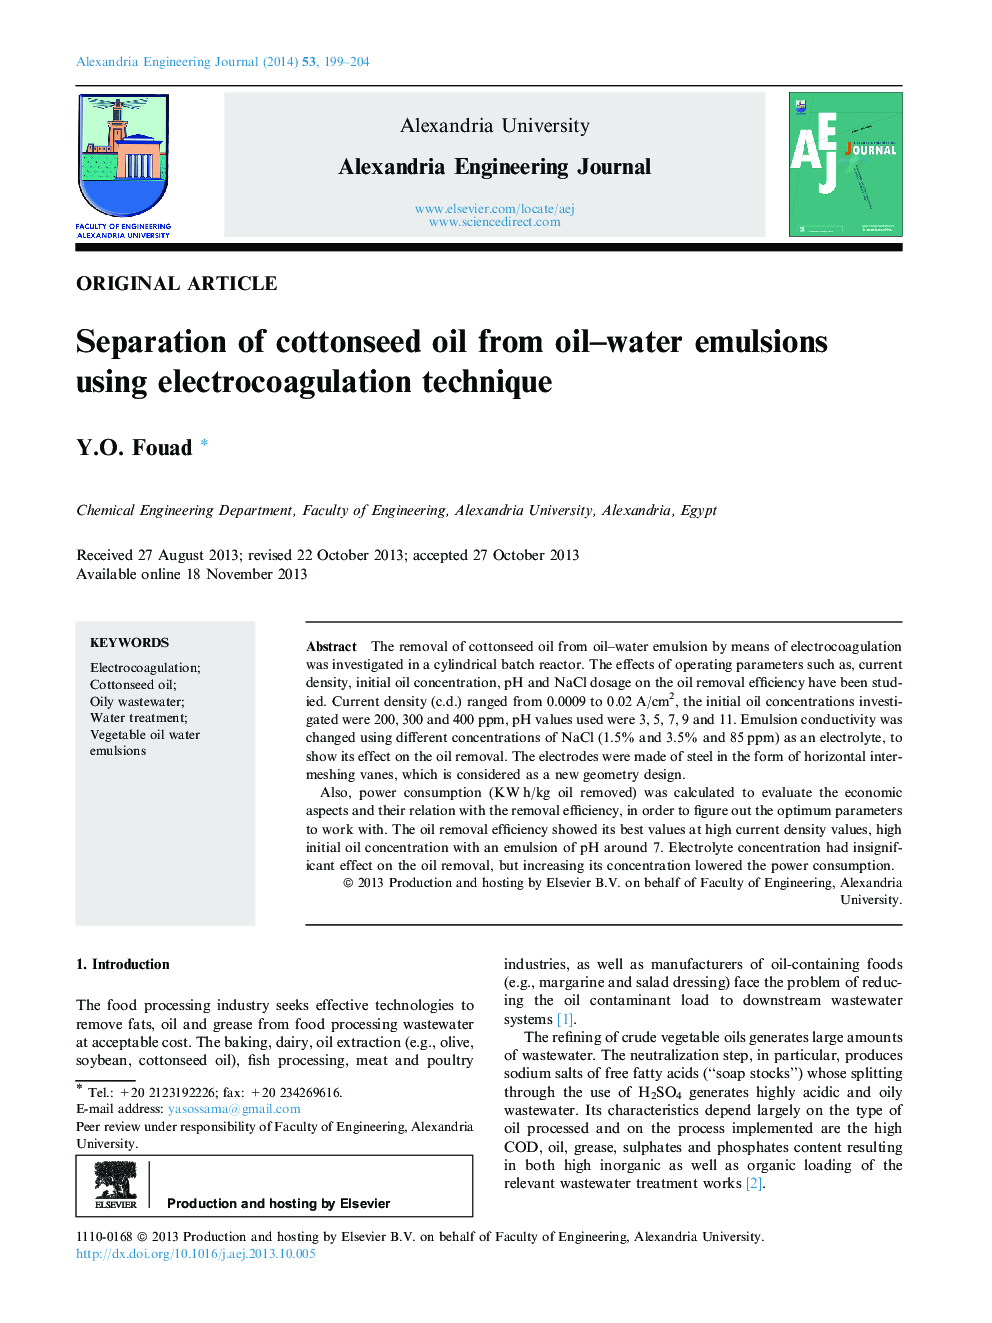 Separation of cottonseed oil from oil–water emulsions using electrocoagulation technique 